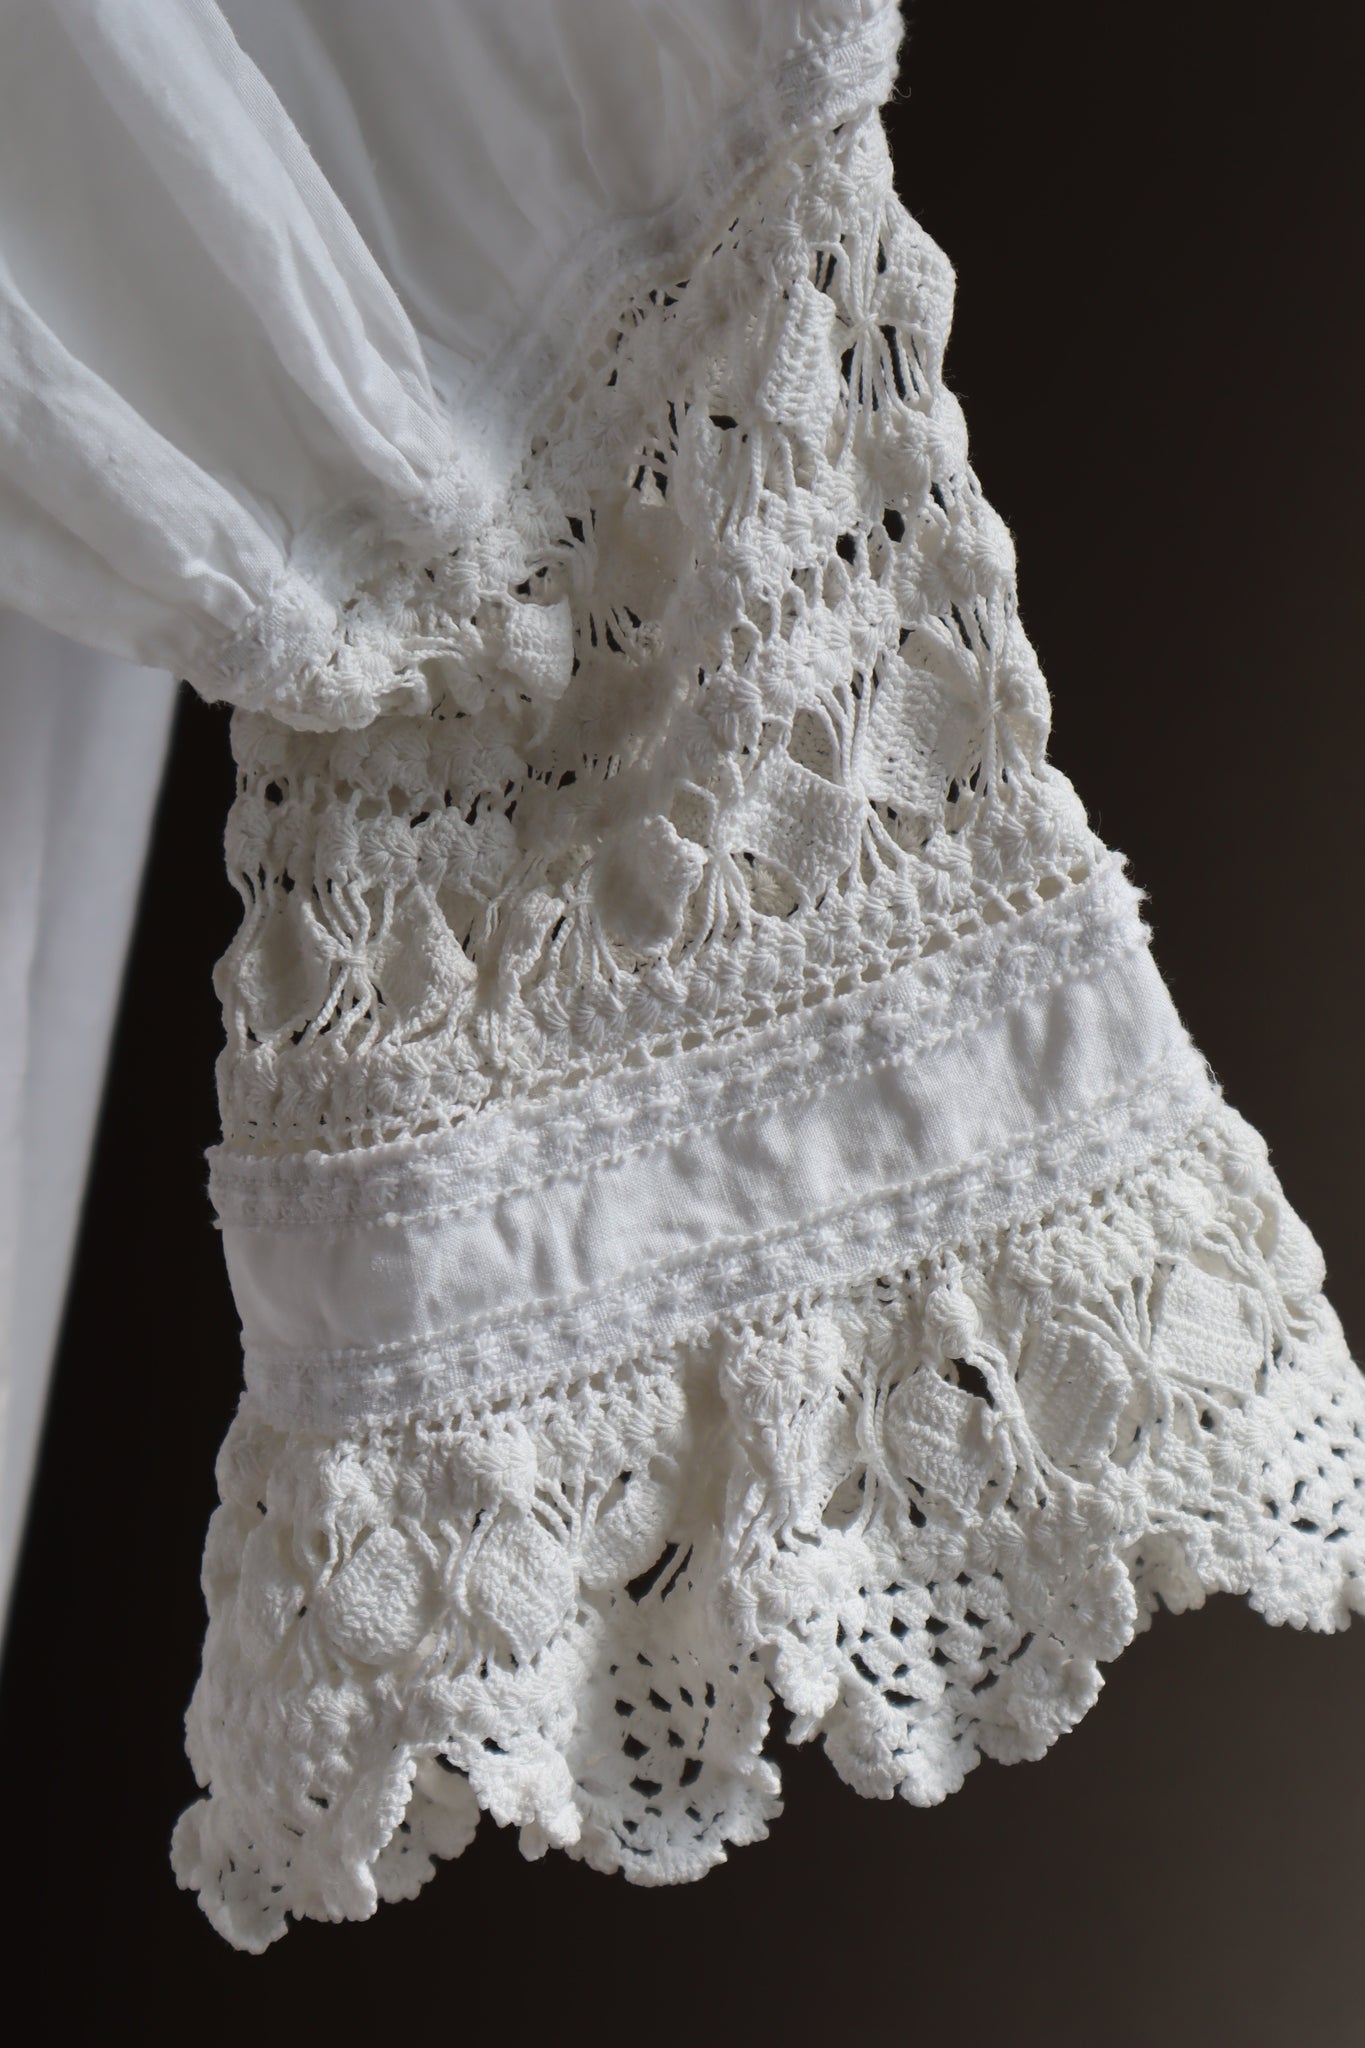 1900s Crocheted Lace Cotton Dress